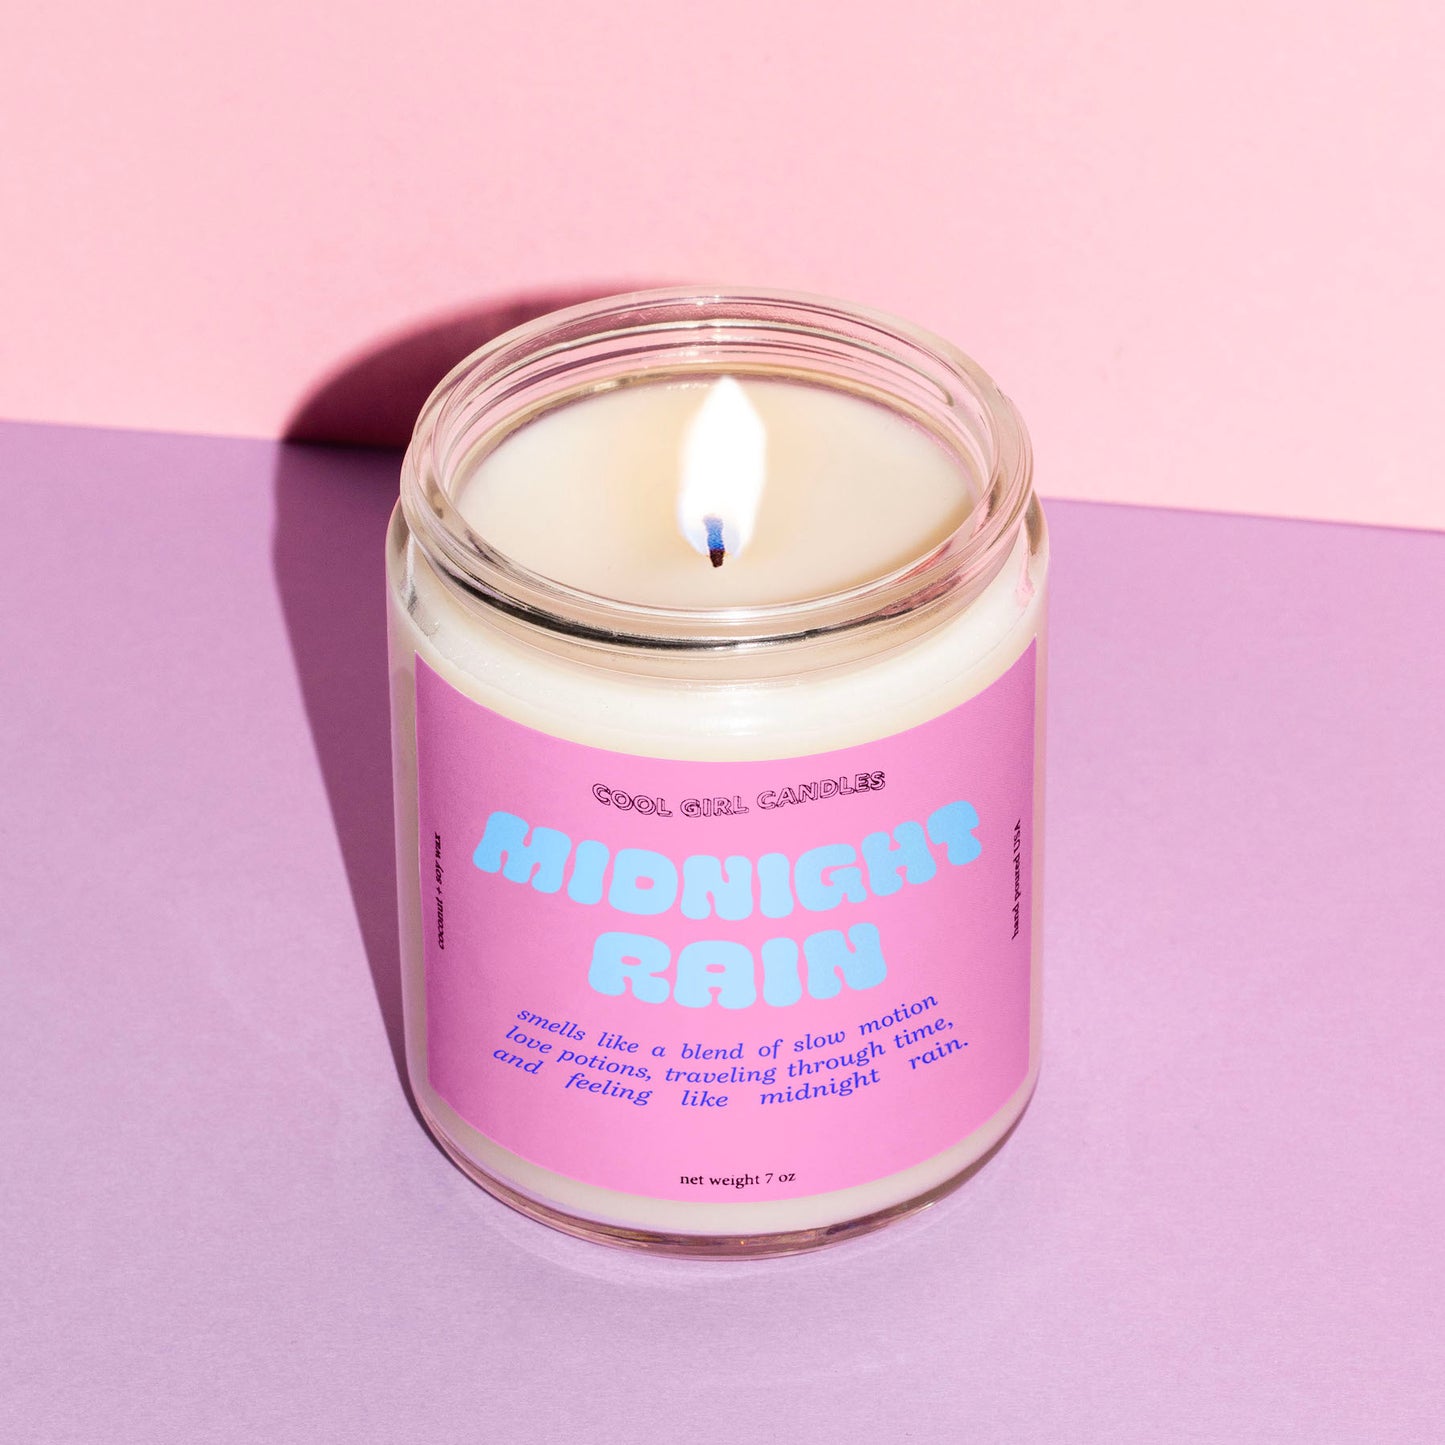 Taylor Swift fan gift — a midnight rain candle perfect for lighting while listening to her new Midnights album